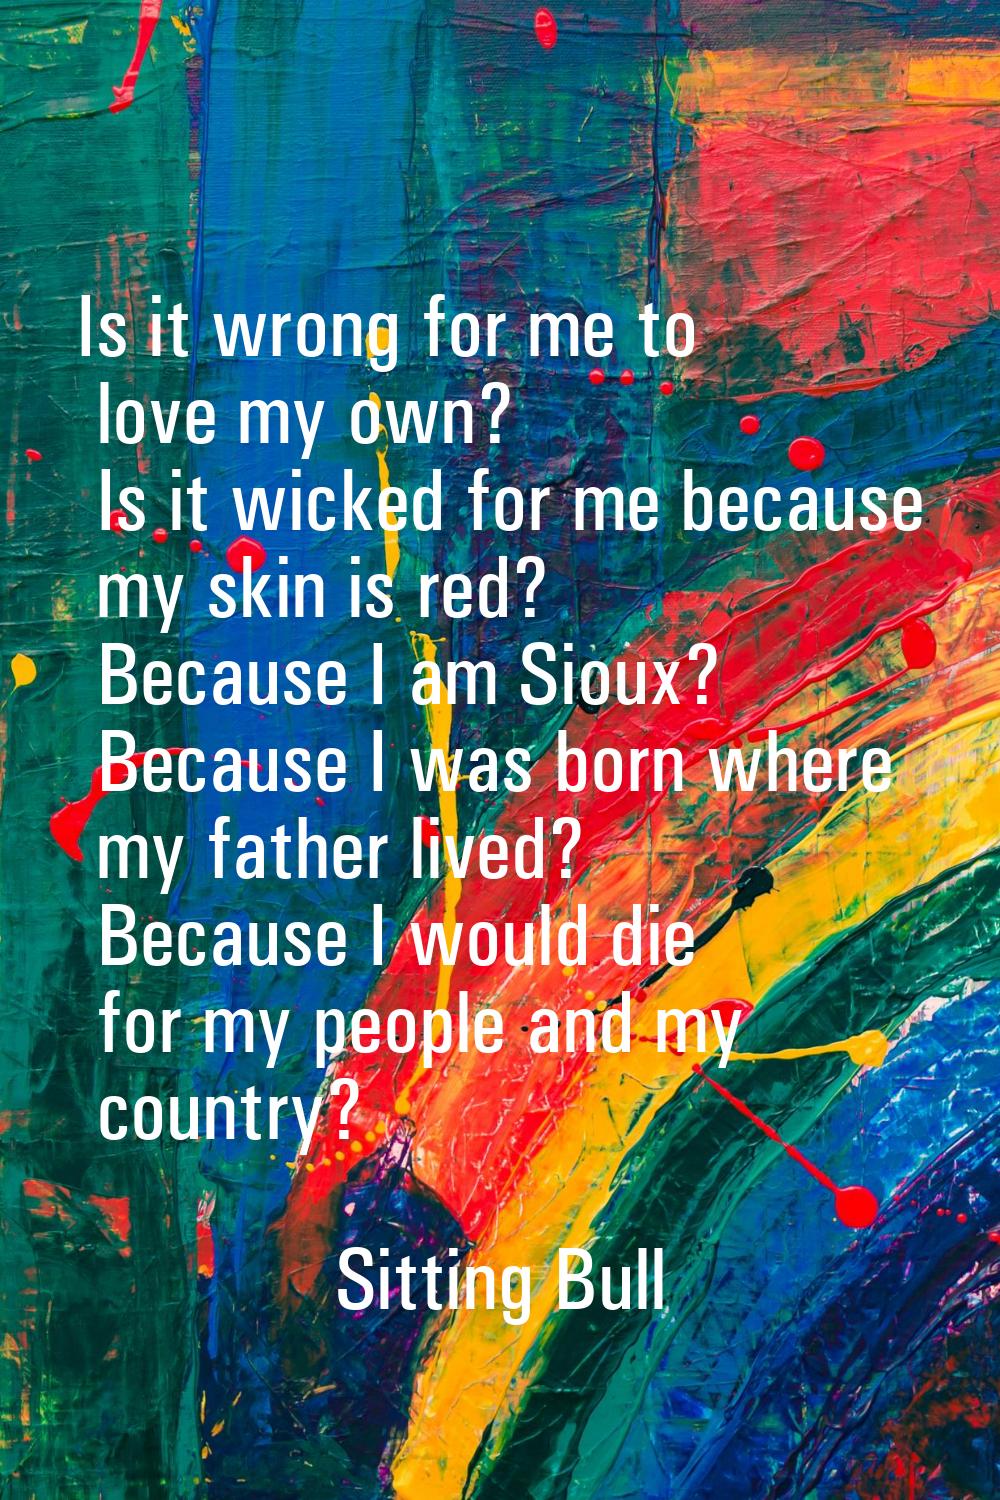 Is it wrong for me to love my own? Is it wicked for me because my skin is red? Because I am Sioux? 